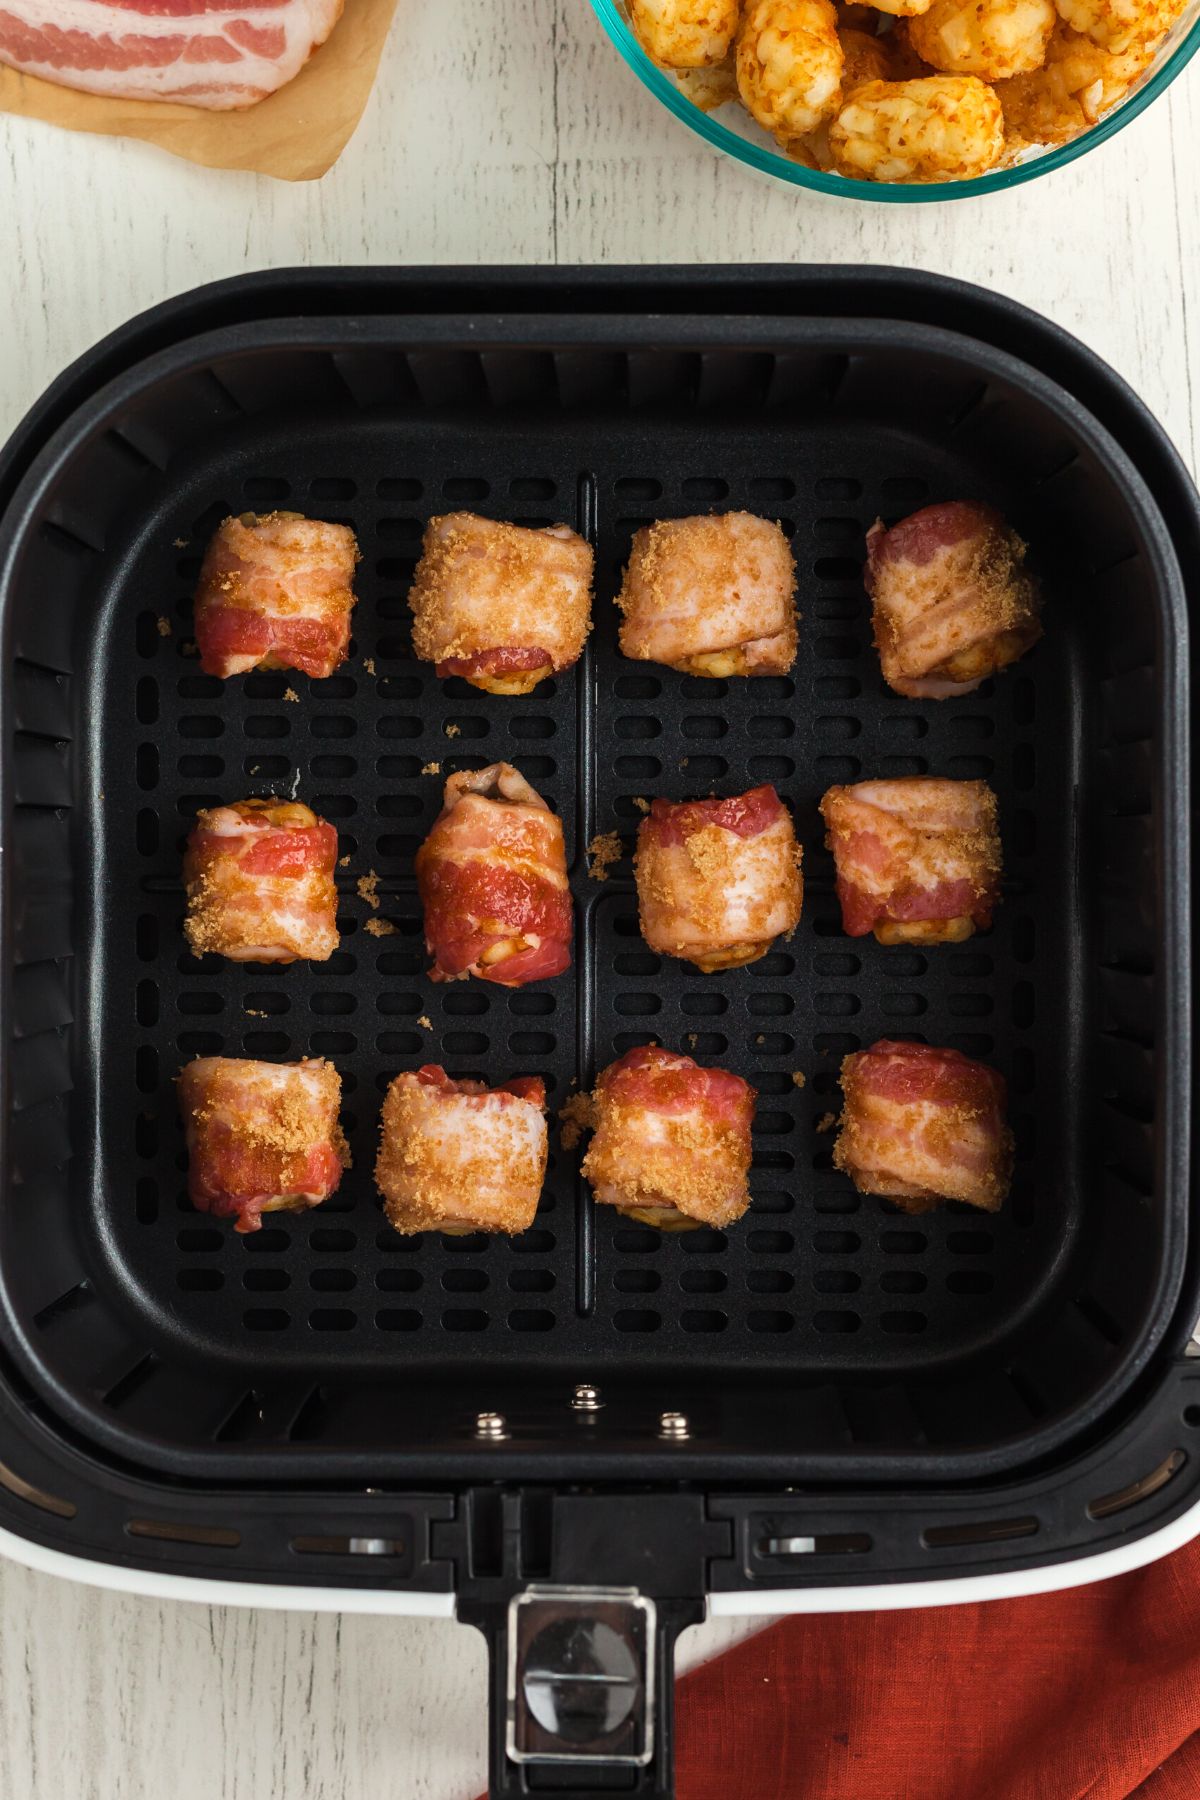 Bacon wrapped and sugar coated tater tots in the air fryer basket